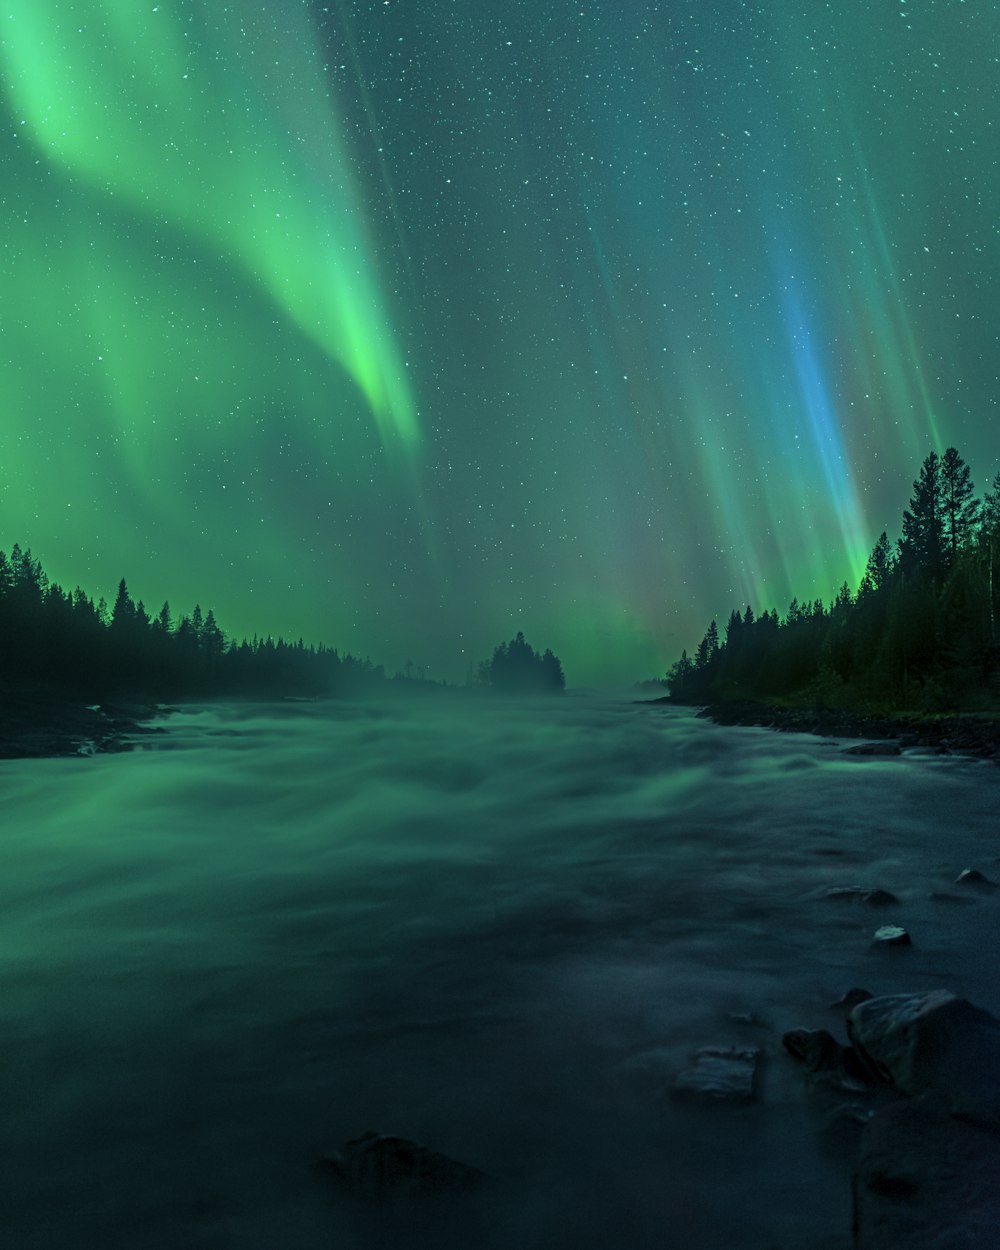 a river under a green and blue sky filled with aurora lights